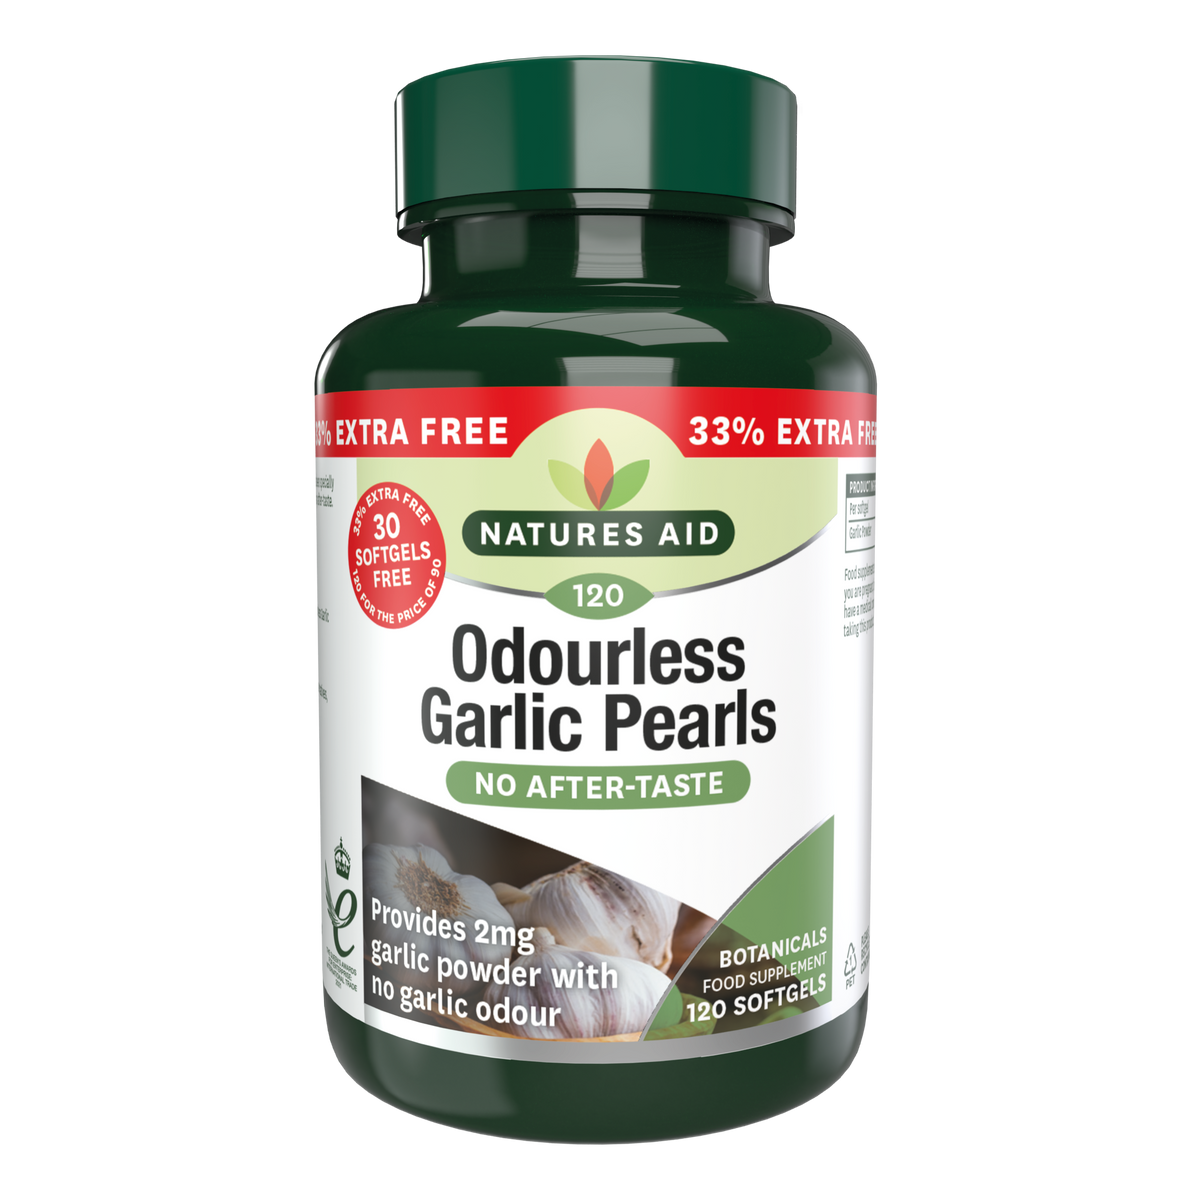 Natures Aid Odourless Garlic Pearls 33% Extra 120